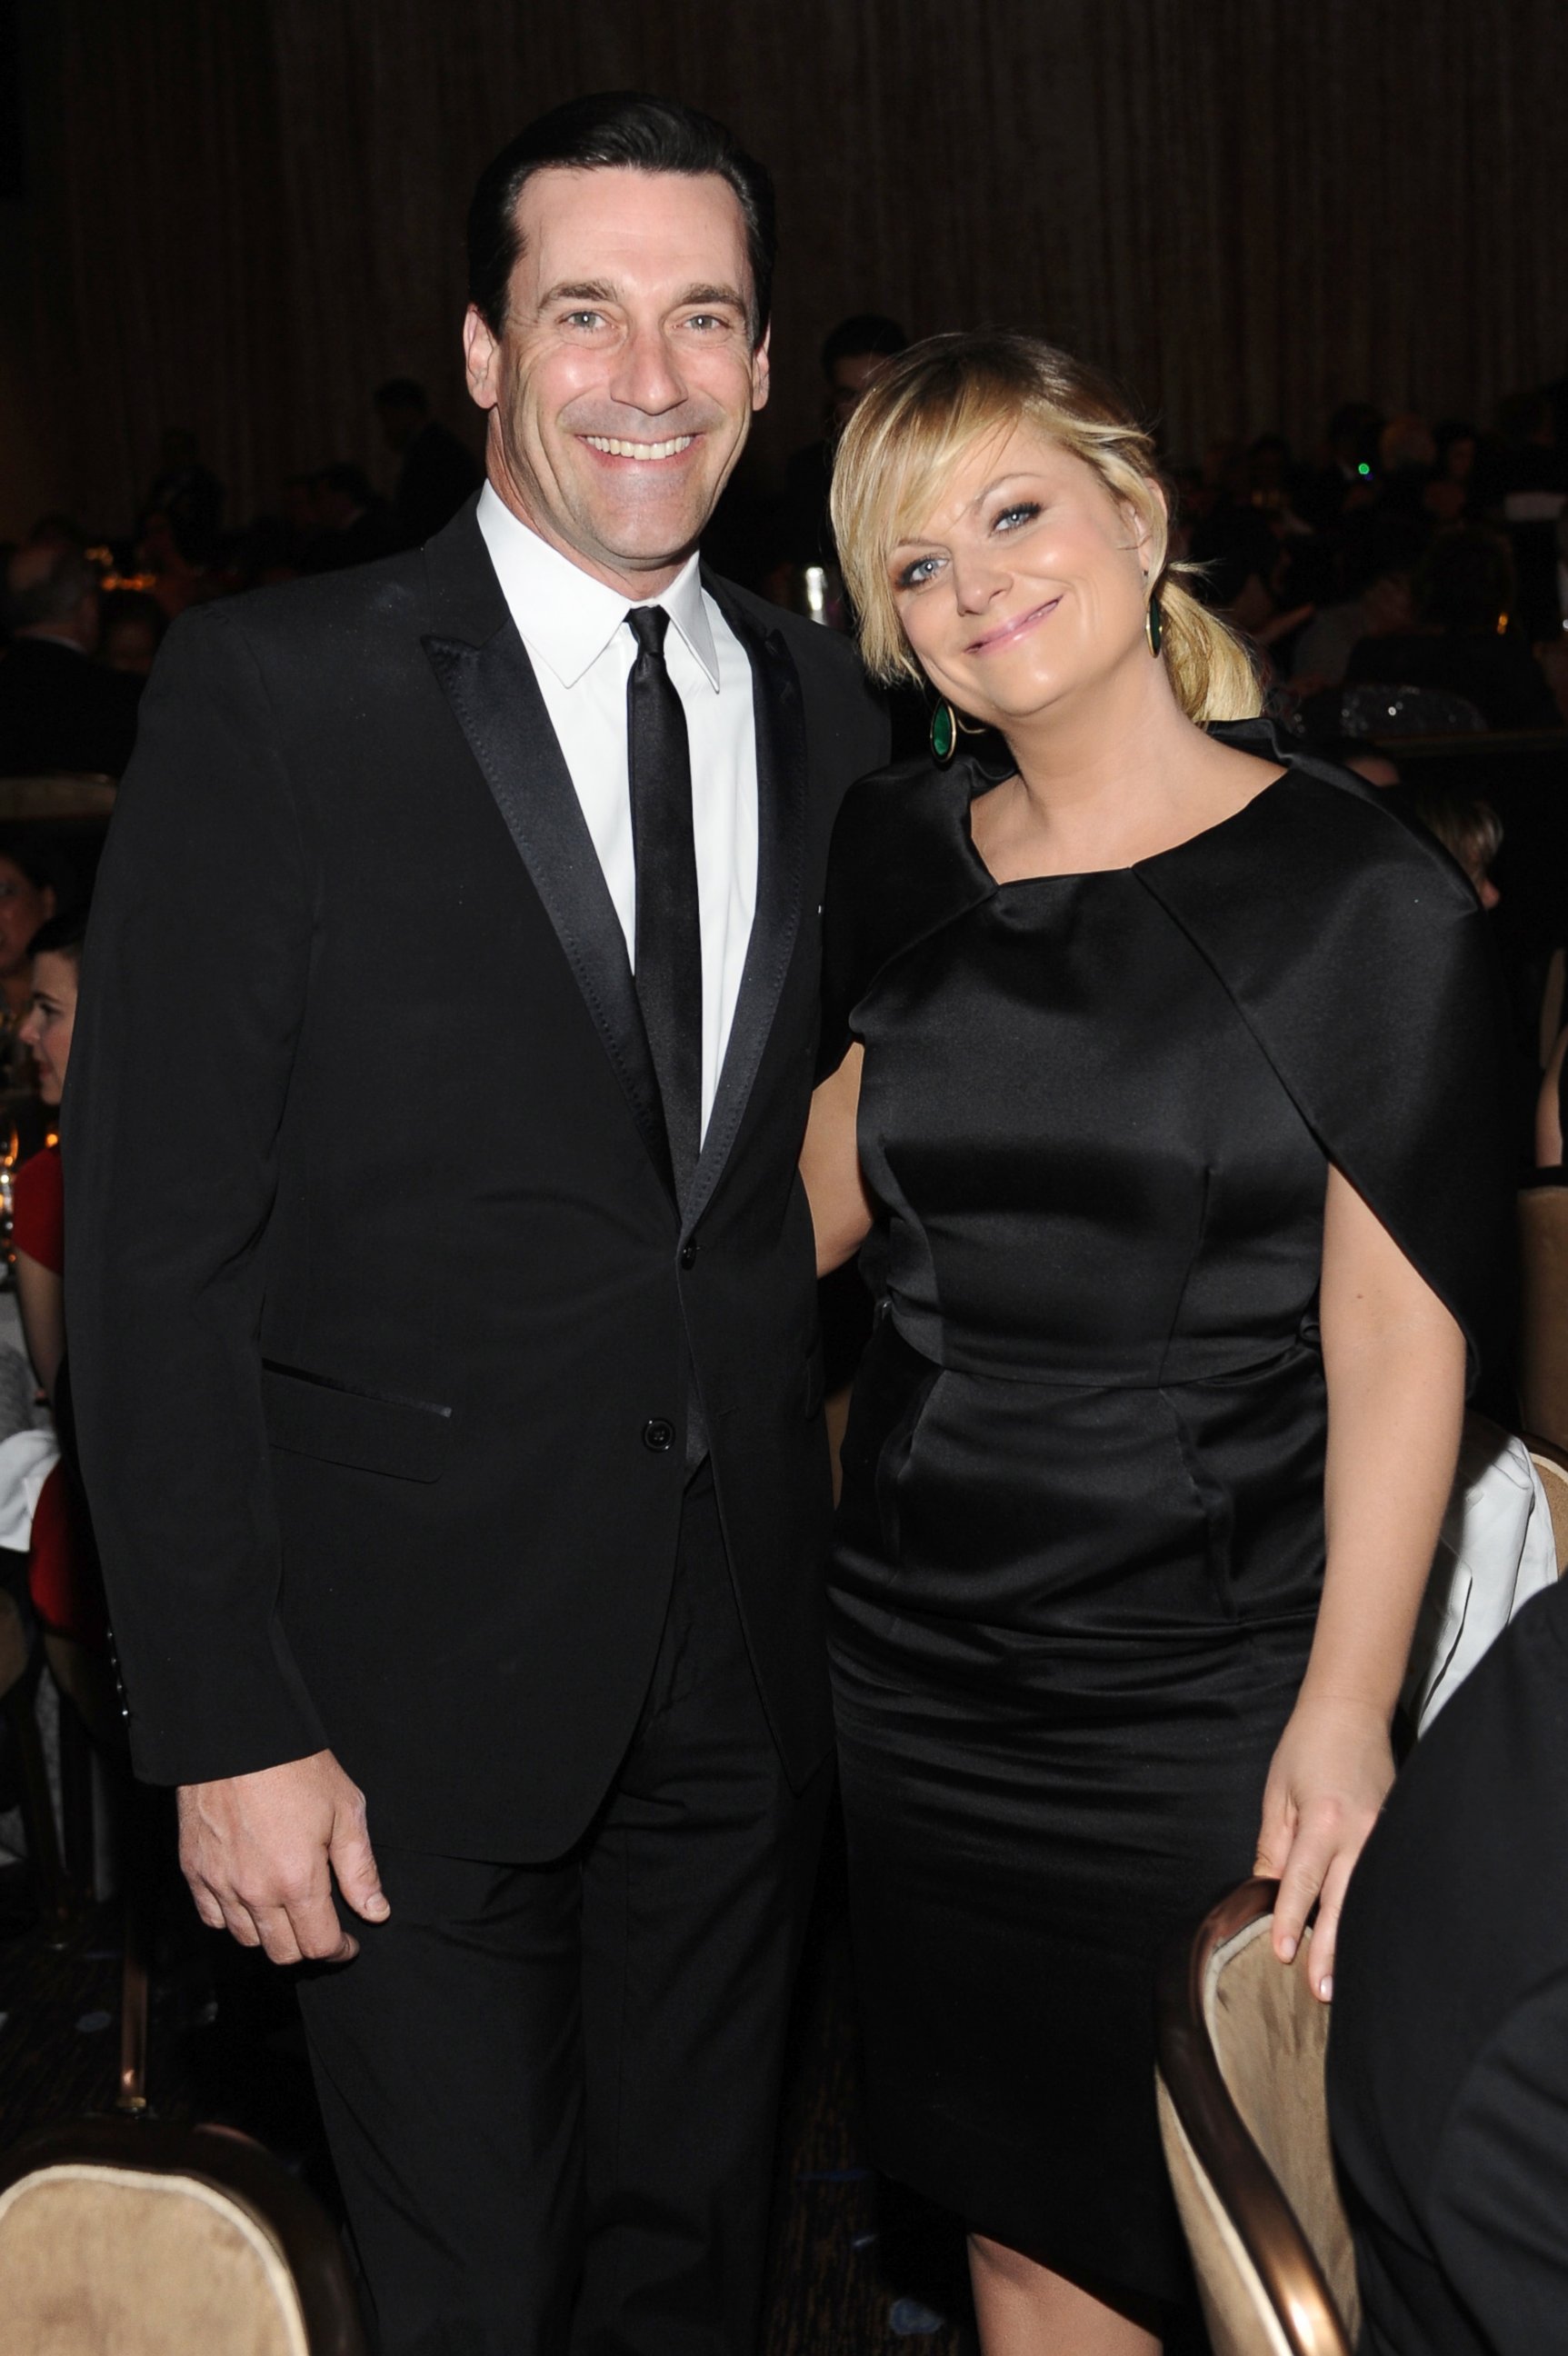 Jon Hamm and Amy Poehler both offered their time to Sen. Al Franken's reelection bid, and met with campaign contributors in 2014.